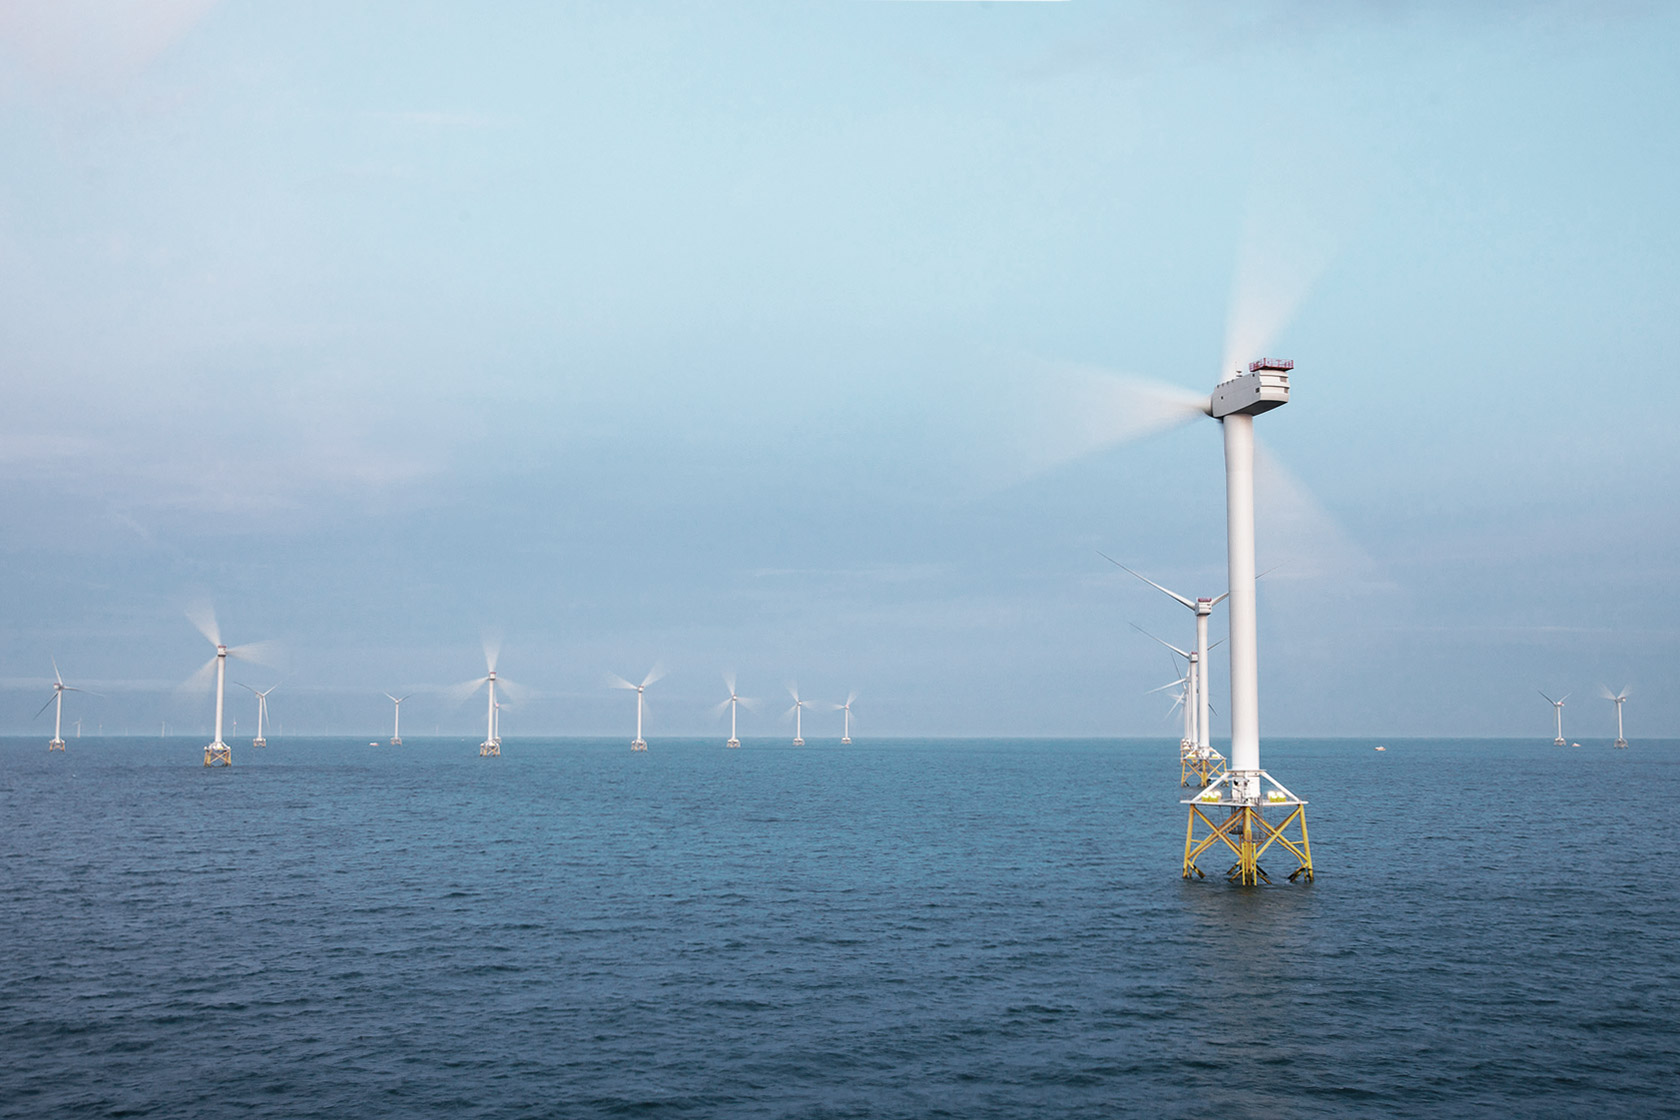 Wind turbines at Ormonde offshore wind farm in the UK